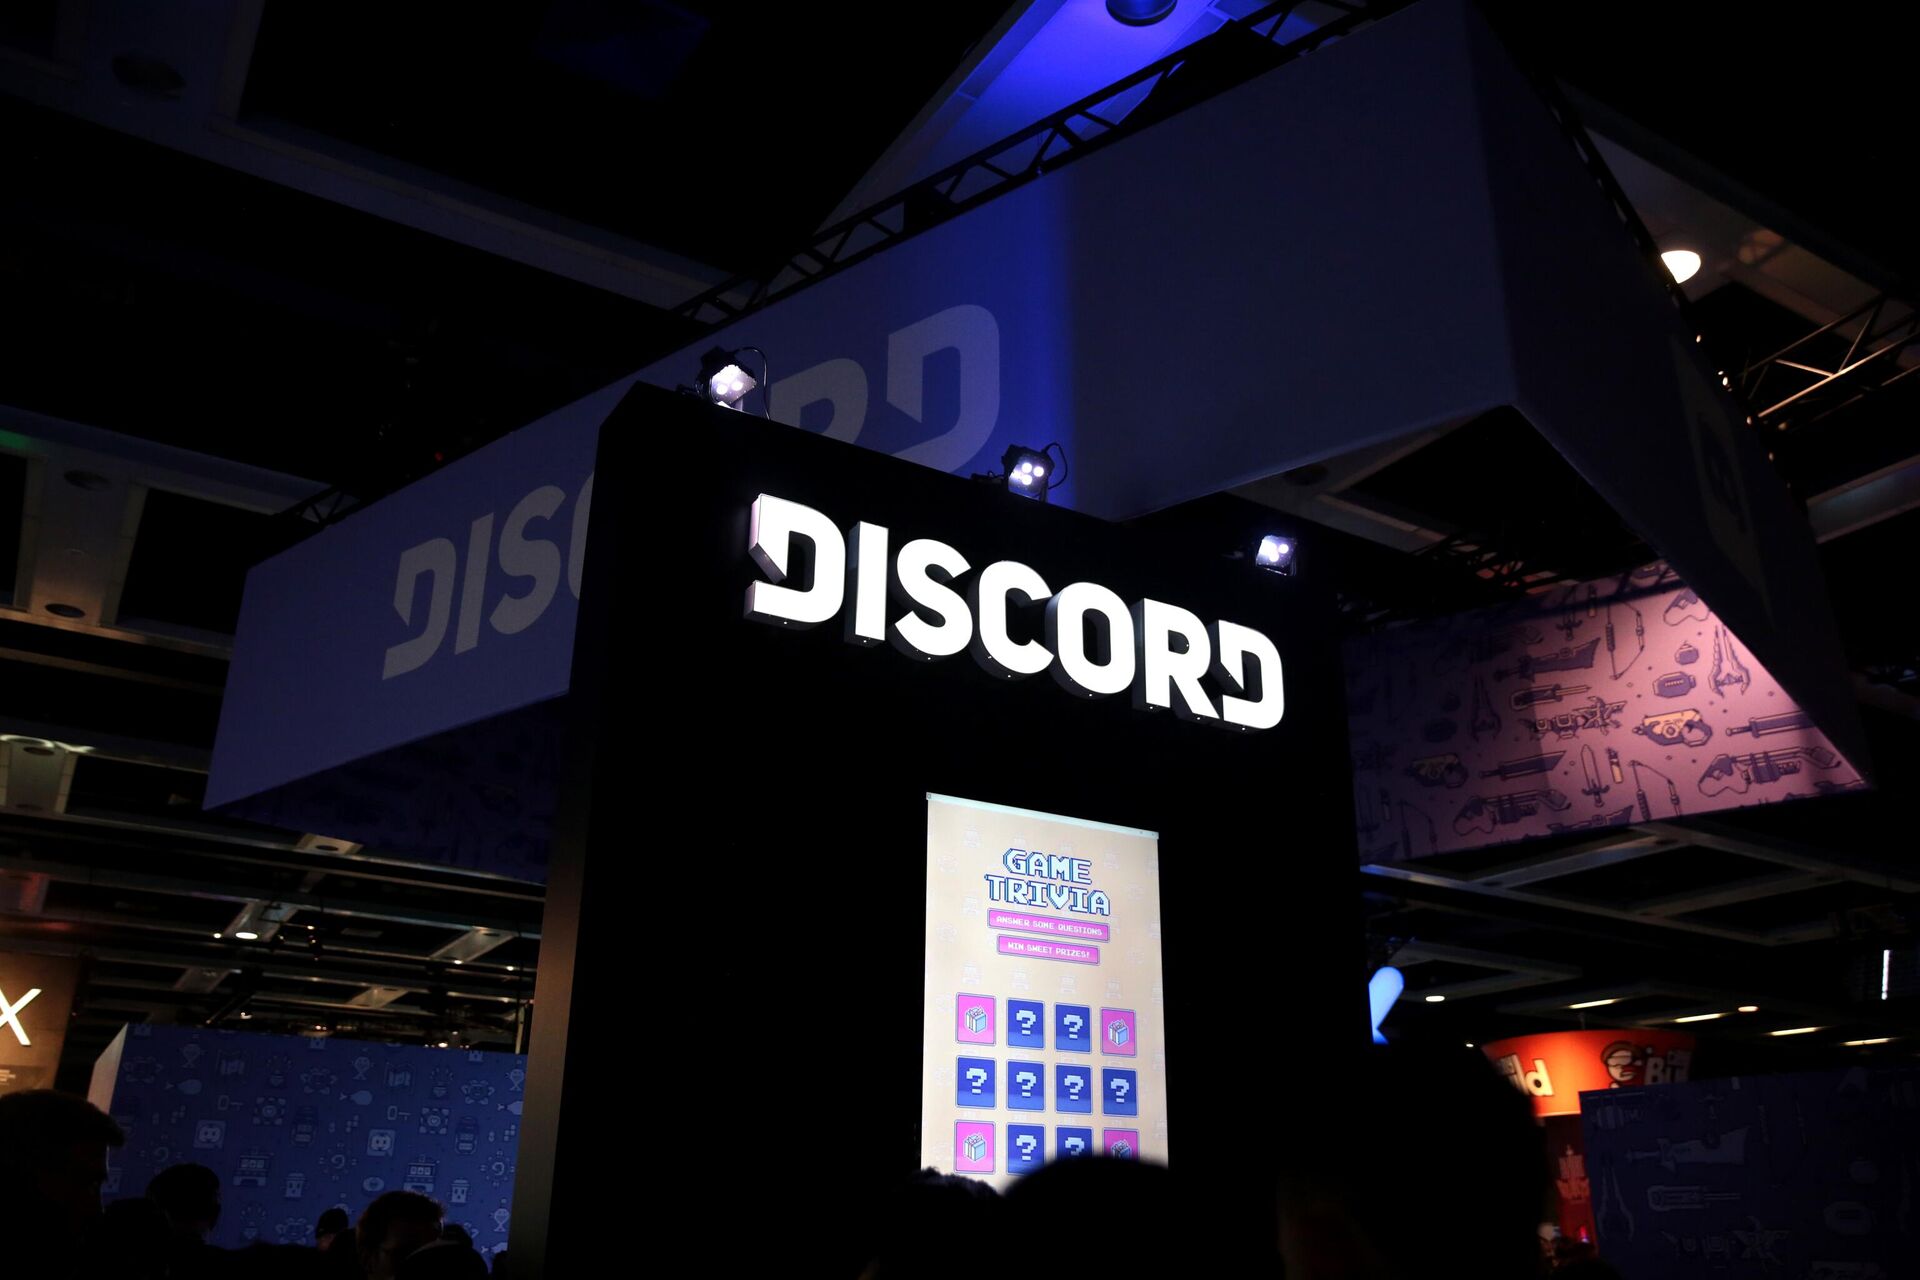 Discord booth at the 2018 PAX West at the Washington State Convention Center in Seattle, Washington. - Sputnik International, 1920, 19.04.2023